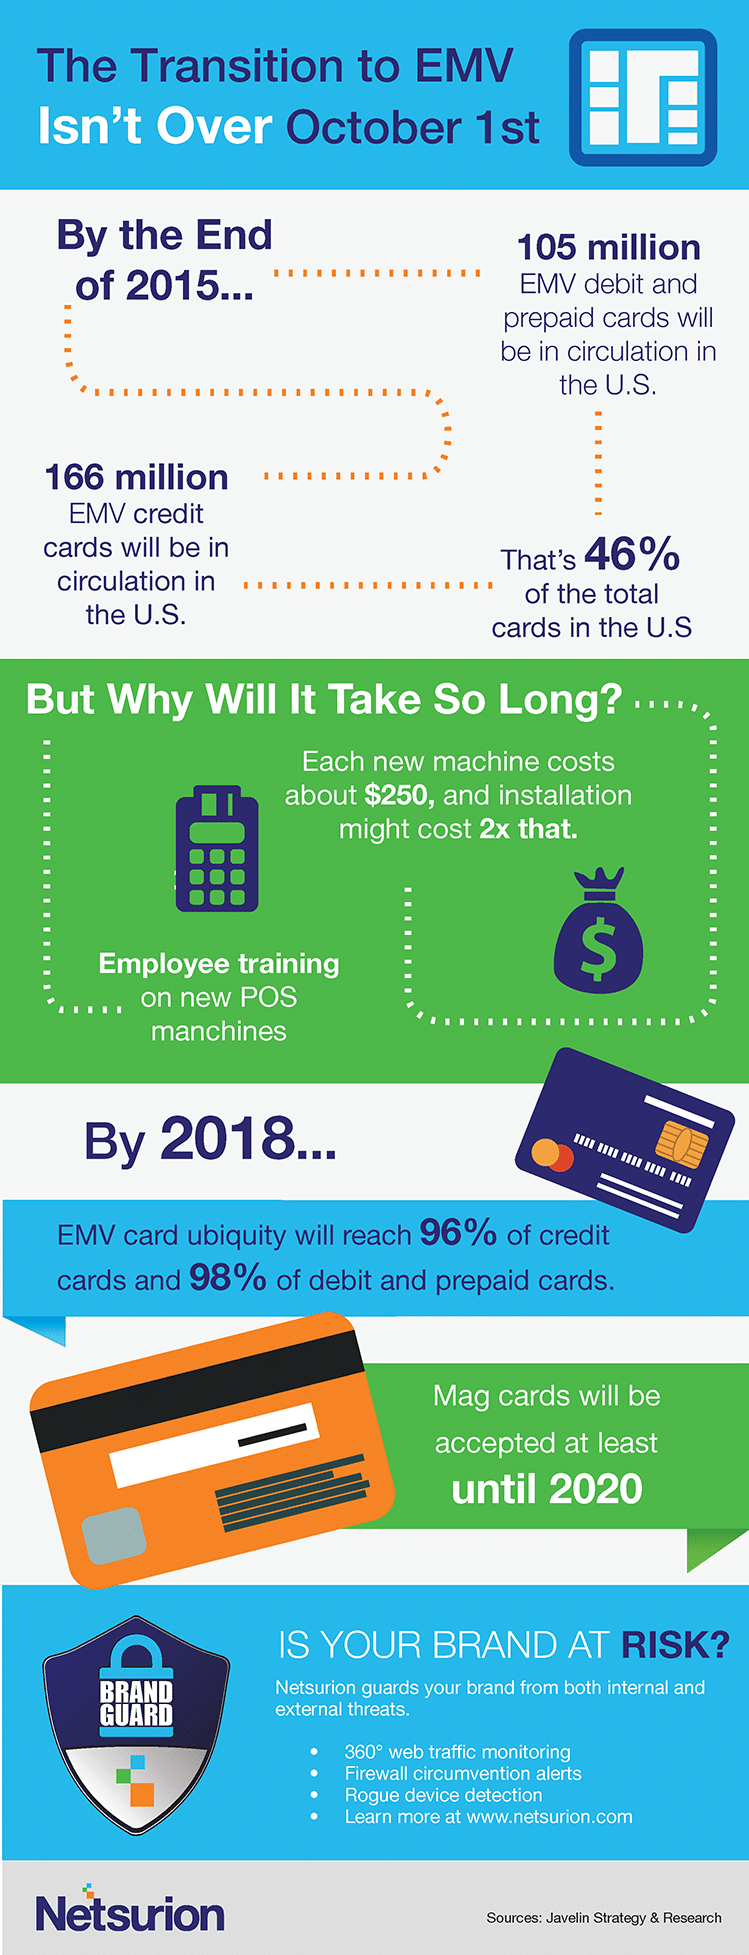 The Transition to EMV Isn't Over